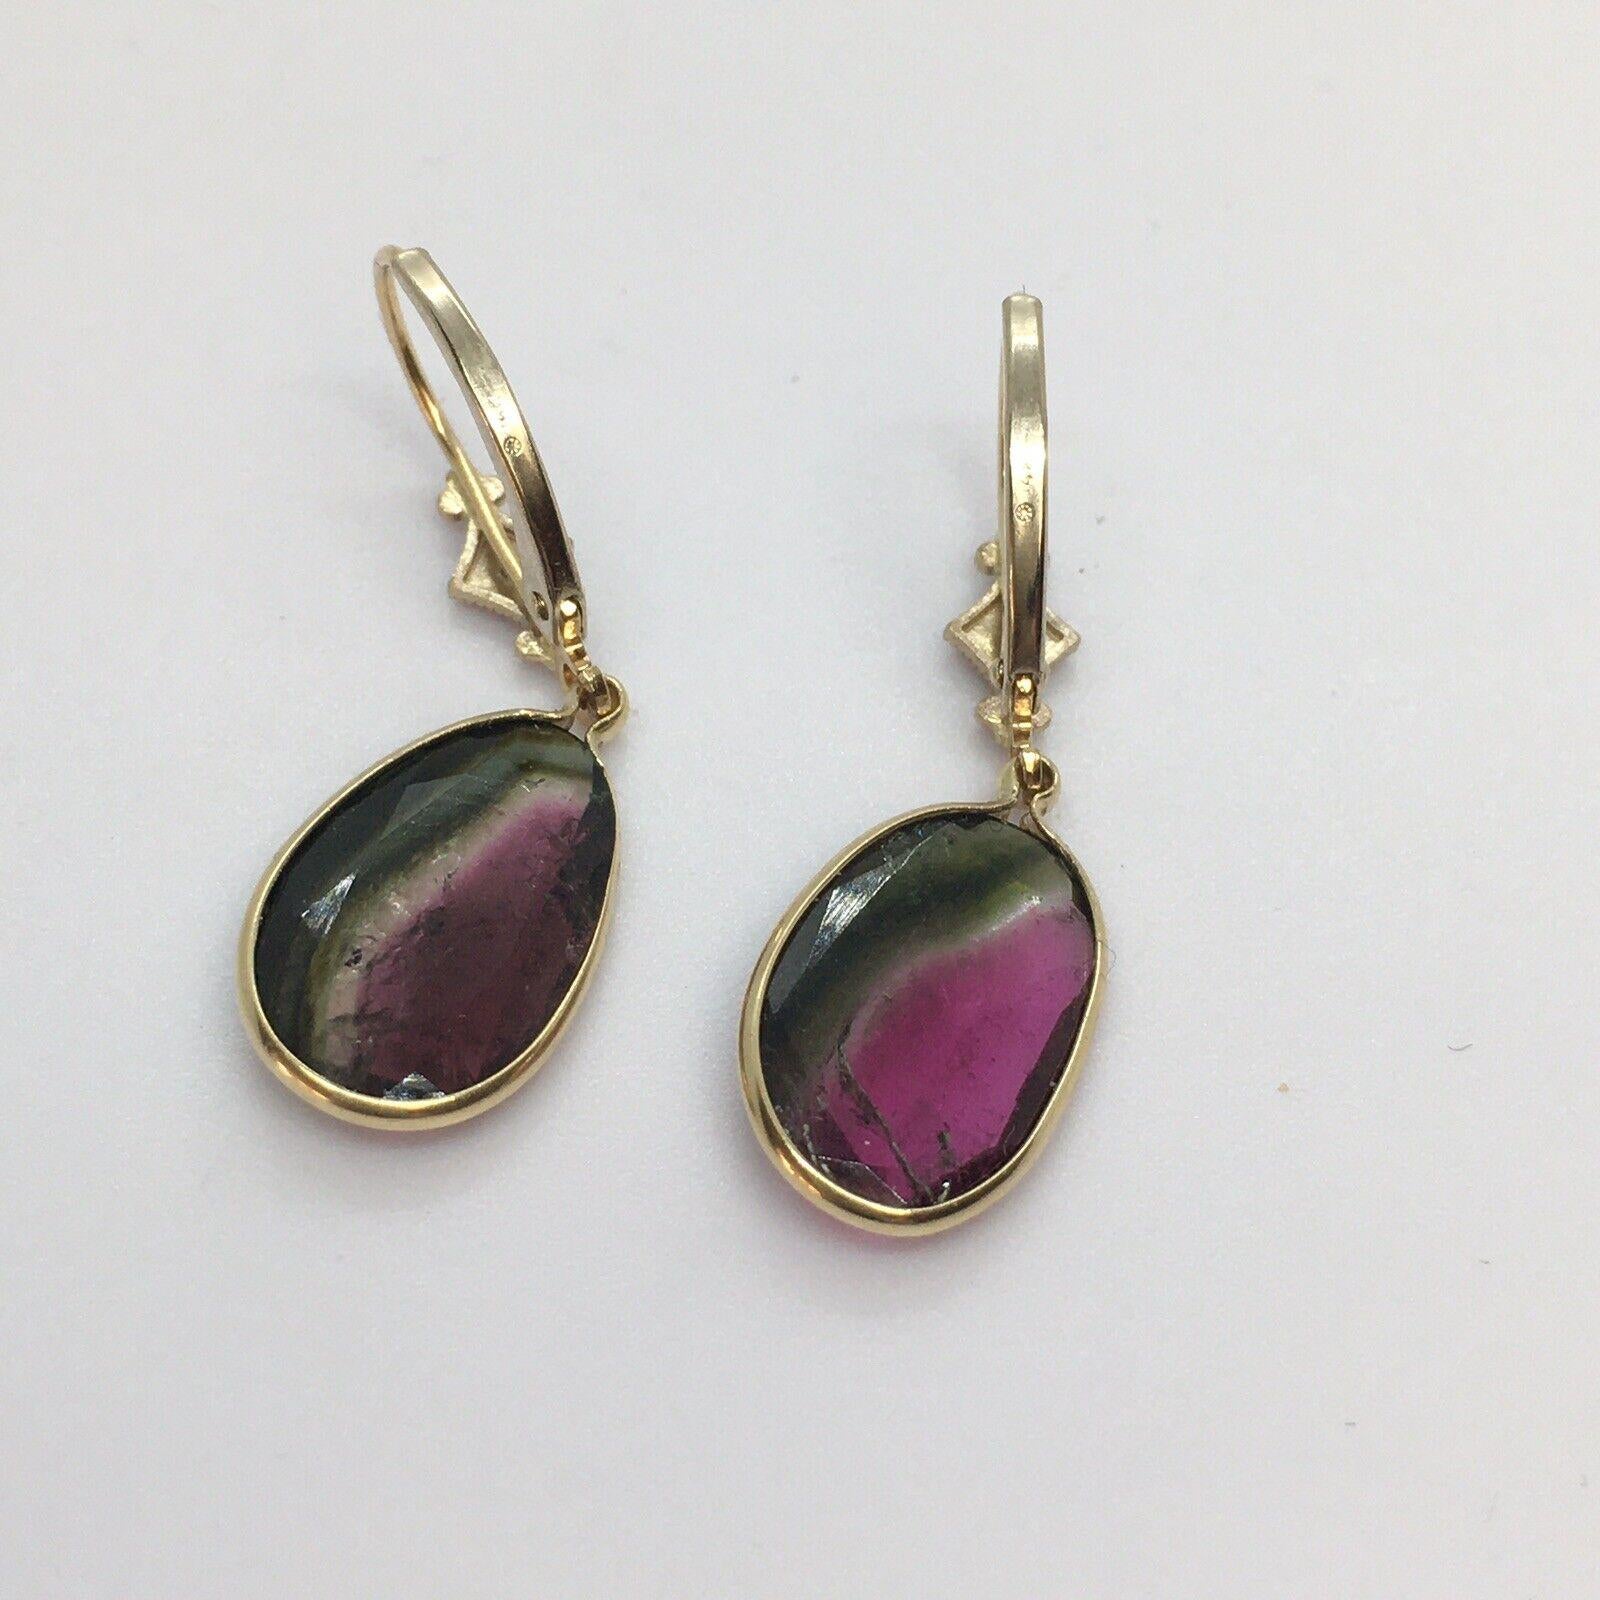 14K Solid Yellow Gold 14mm by 10 mm Rose Cut Bicolor Tourmaline Dangling Wire Earrings


2.3 gram weight
14mm by 10mm Tourmaline
1.25 inch hanging 'from ear lobe'

New Jewelry
Made in our shop at Santa Monica, Ca.